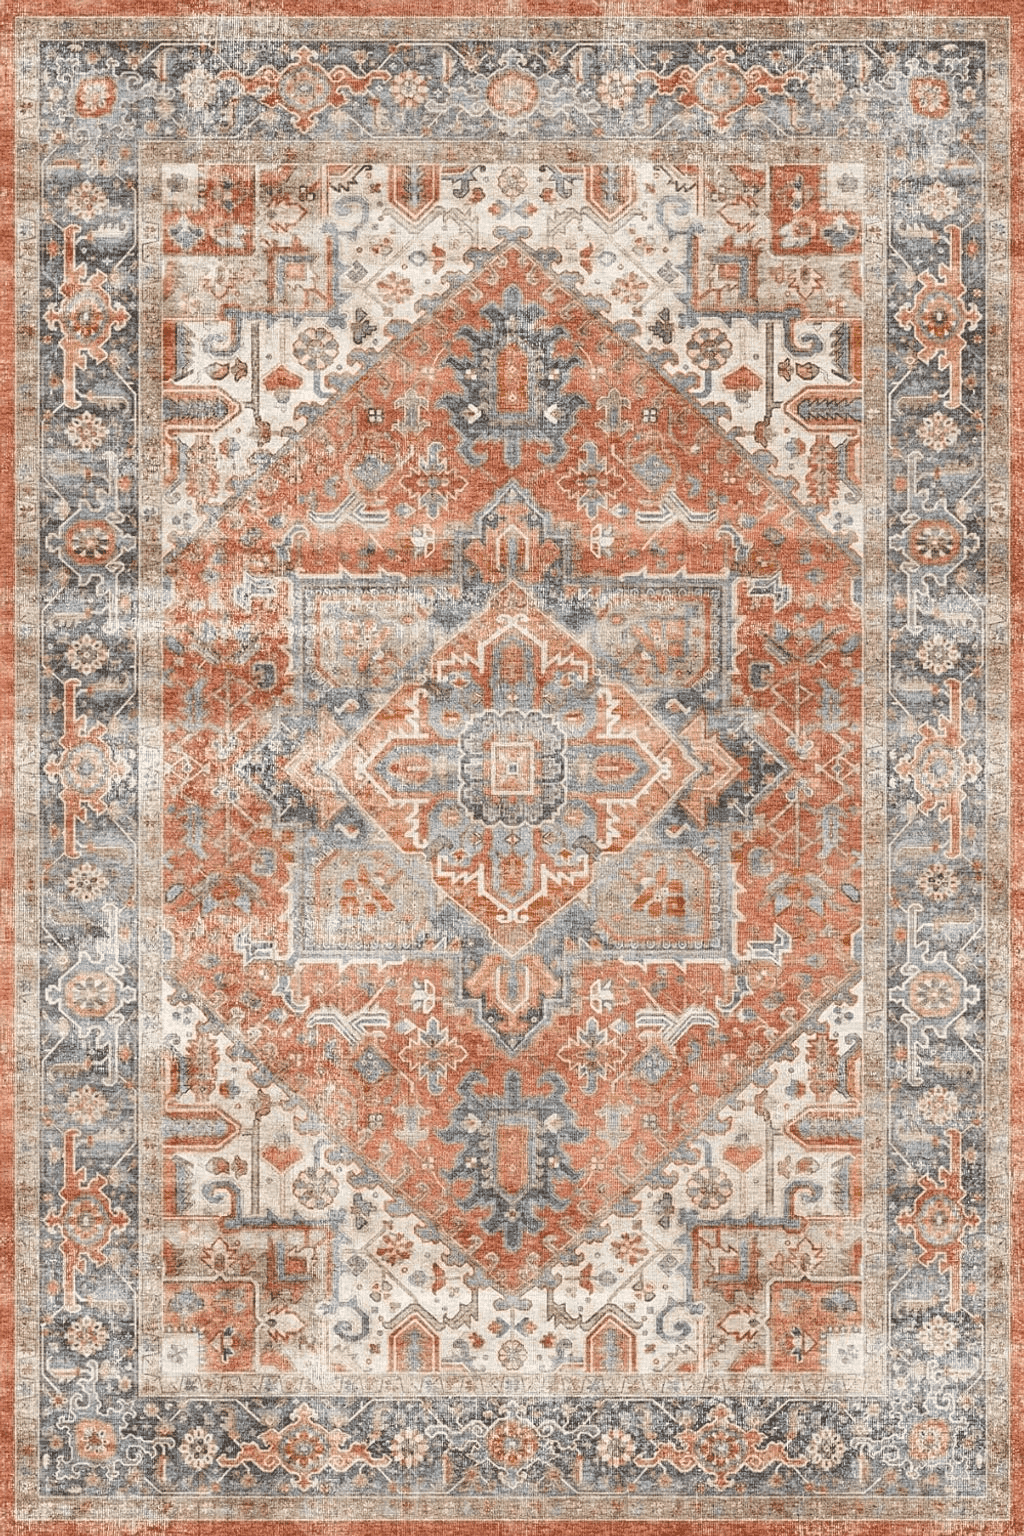 Oriental Dripex Area Rug 4x6 Rug, Ultra-Thin Machine Washable Rug, Oriental Floral Print Boho Rug Carpet, Non-Slip Stain Resistant Indoor Rugs for Living Room Bedroom Dining Room Office